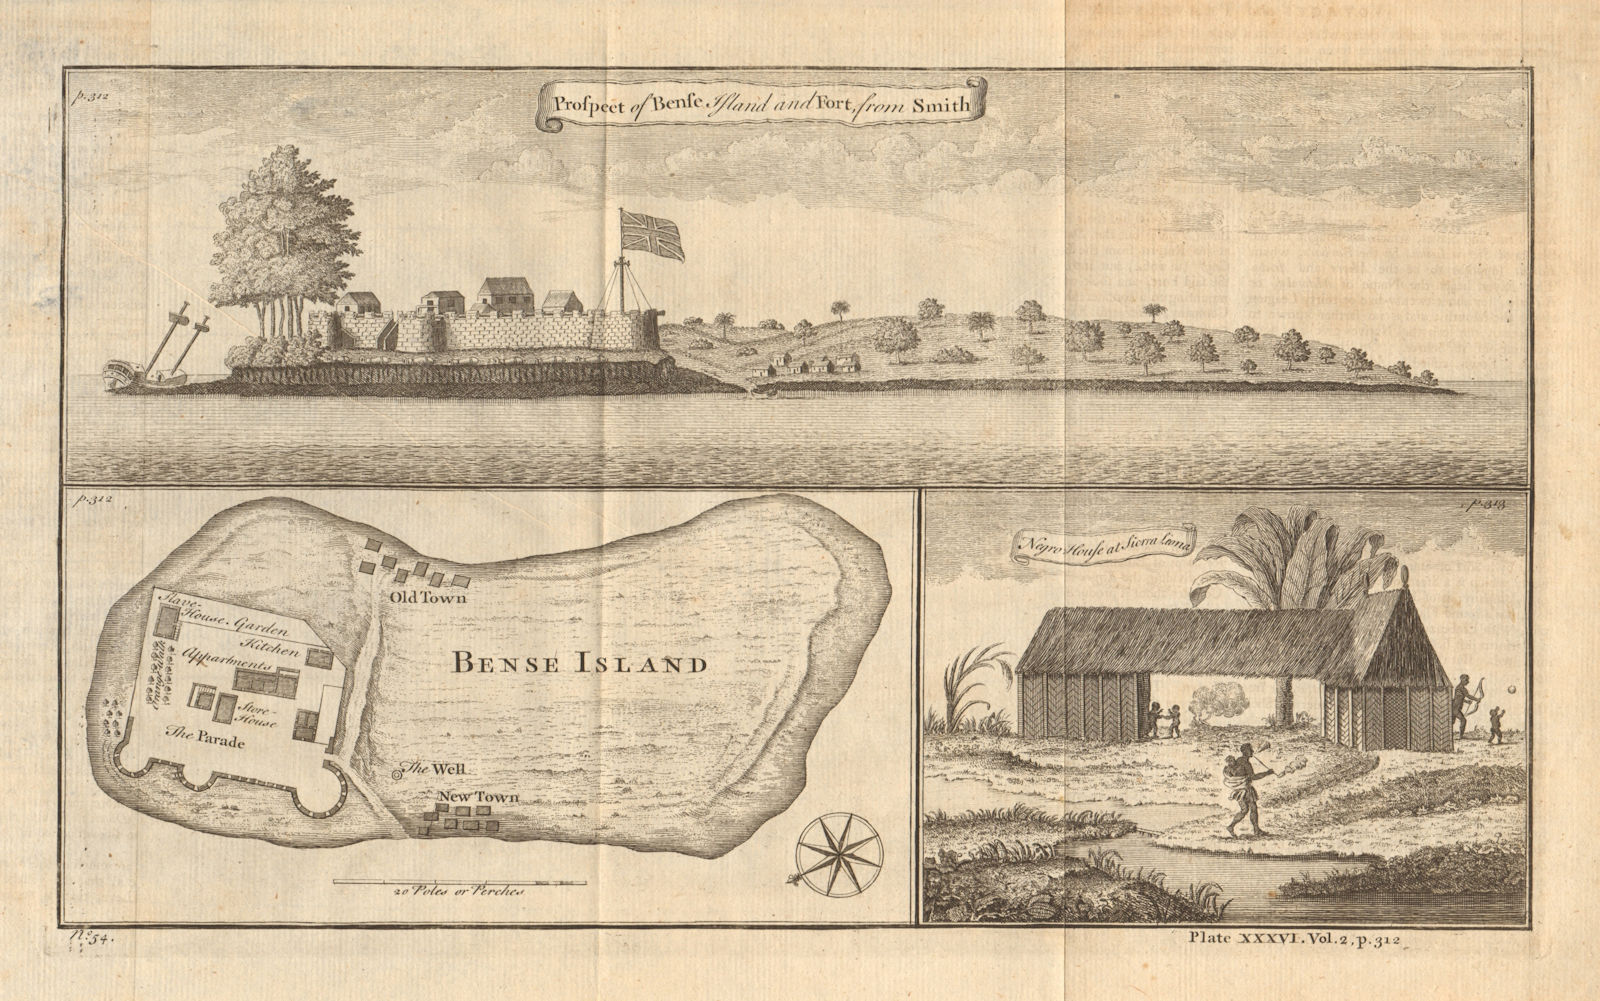 Plan and view of Bense Island & Fort. Bunce, Sierra Leone William SMITH 1745 map